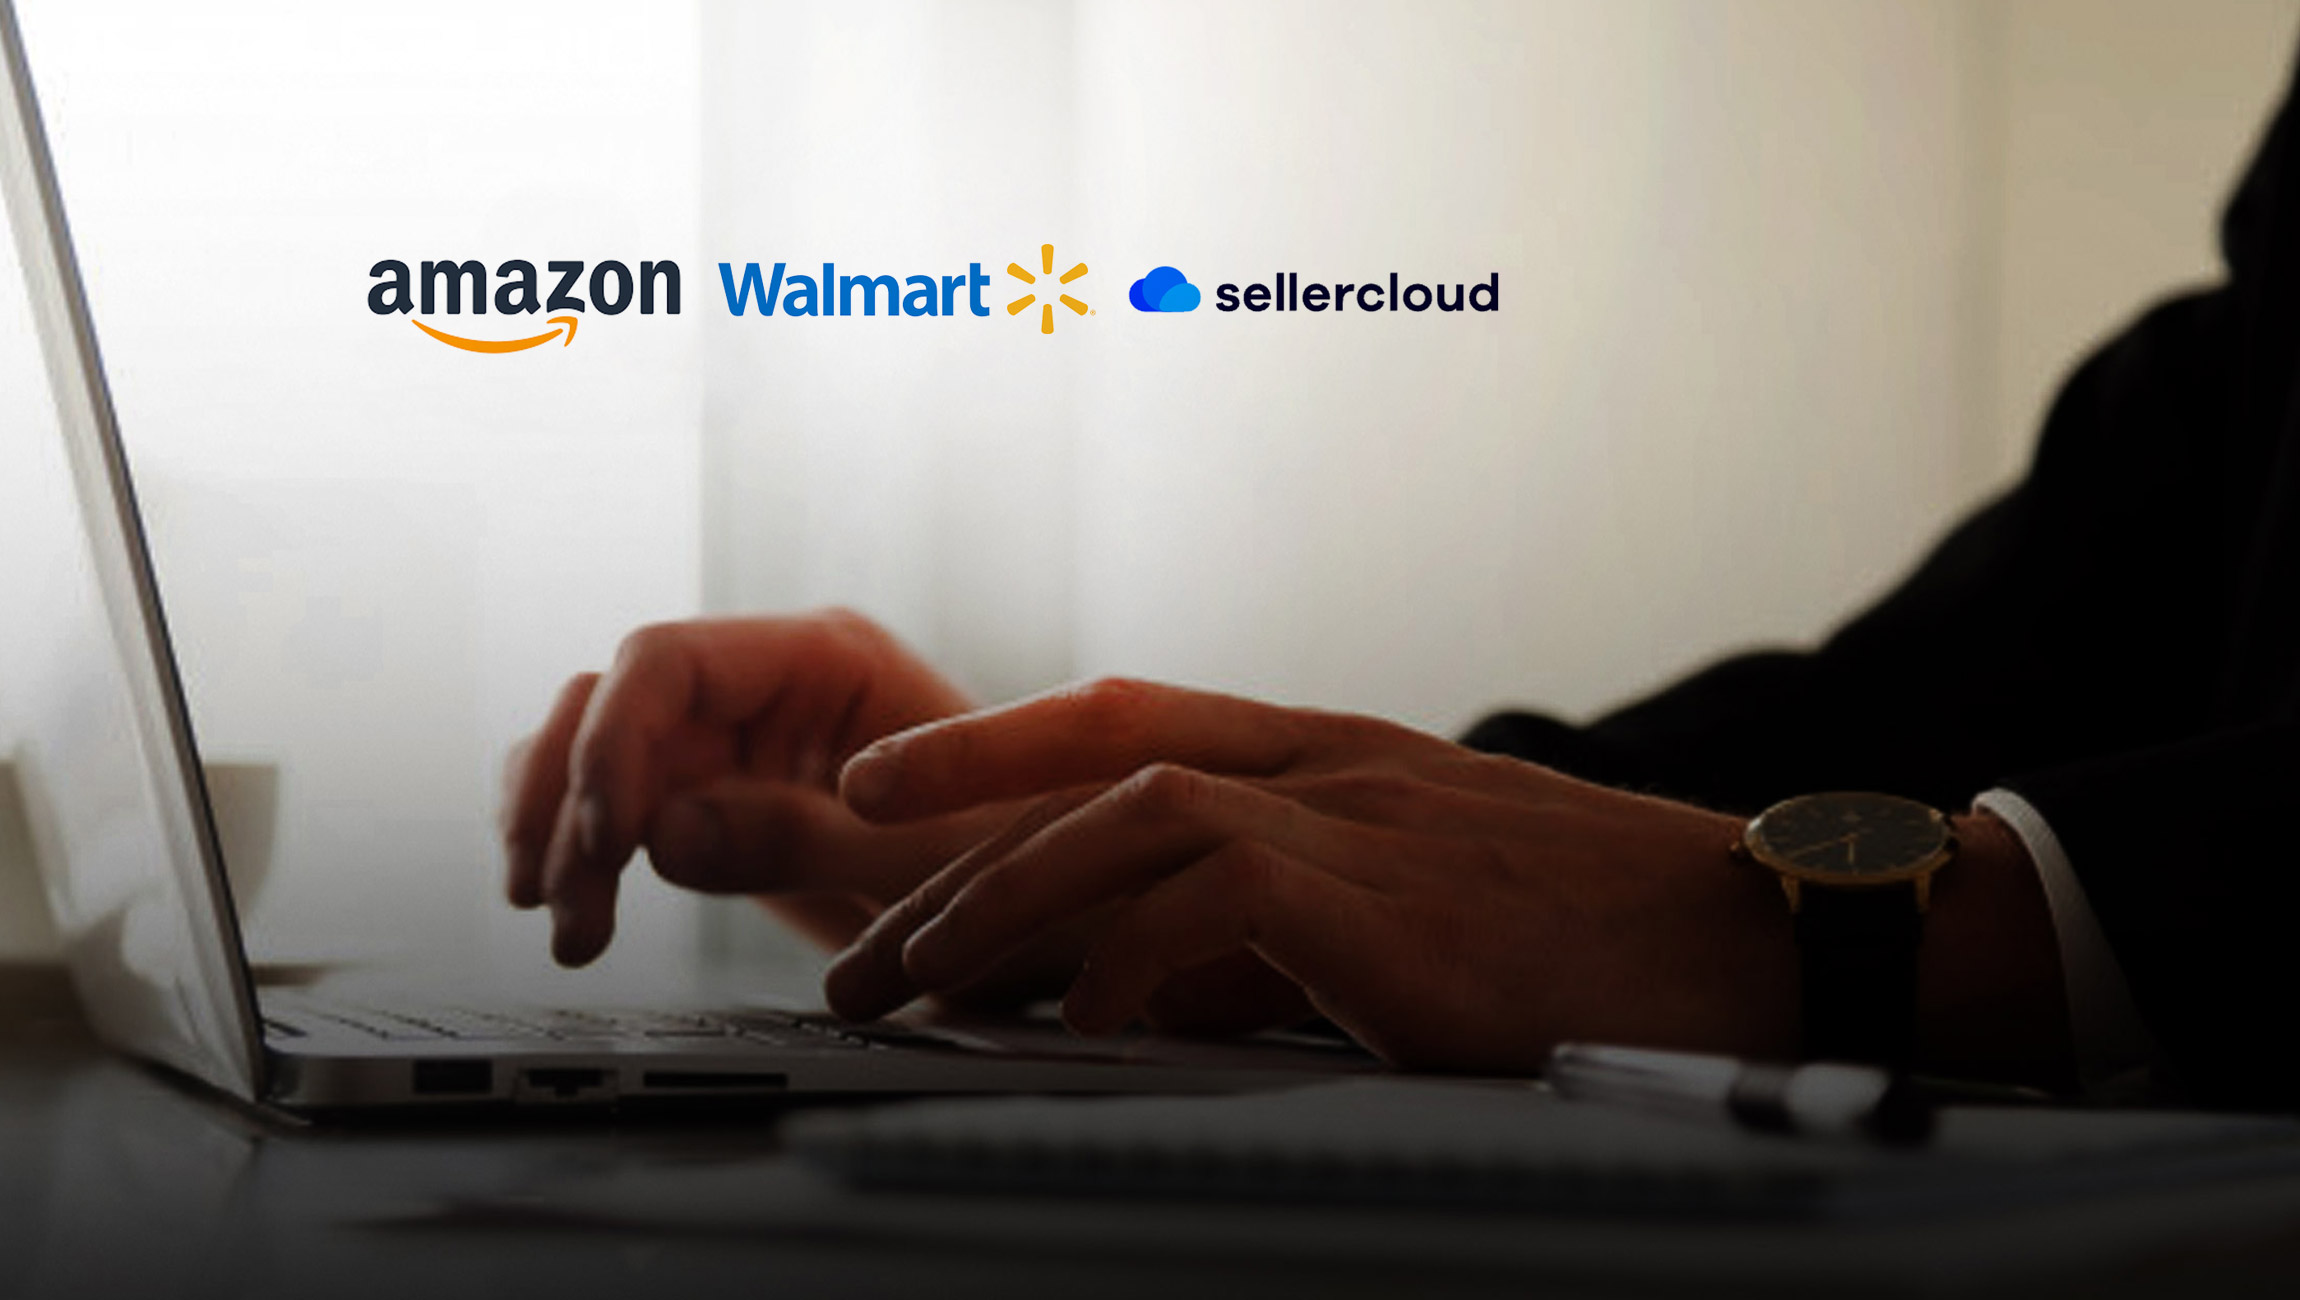 Amazon-and-Walmart-join-Sellercloud’s-2021-User-Conference-_-Ecommerce-Networking-Event